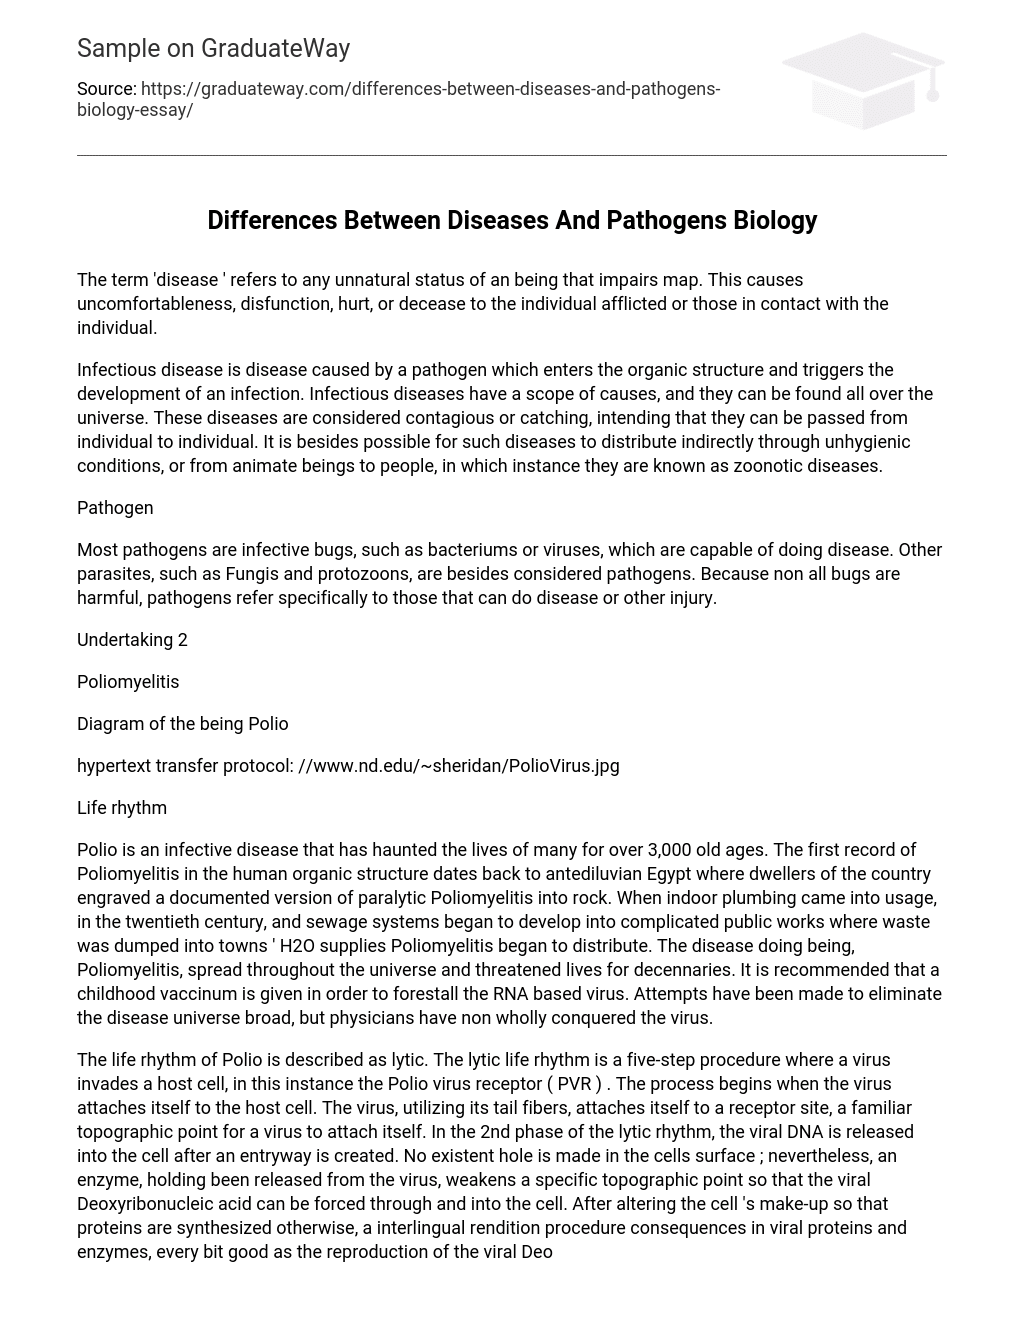 Differences Between Diseases And Pathogens Biology